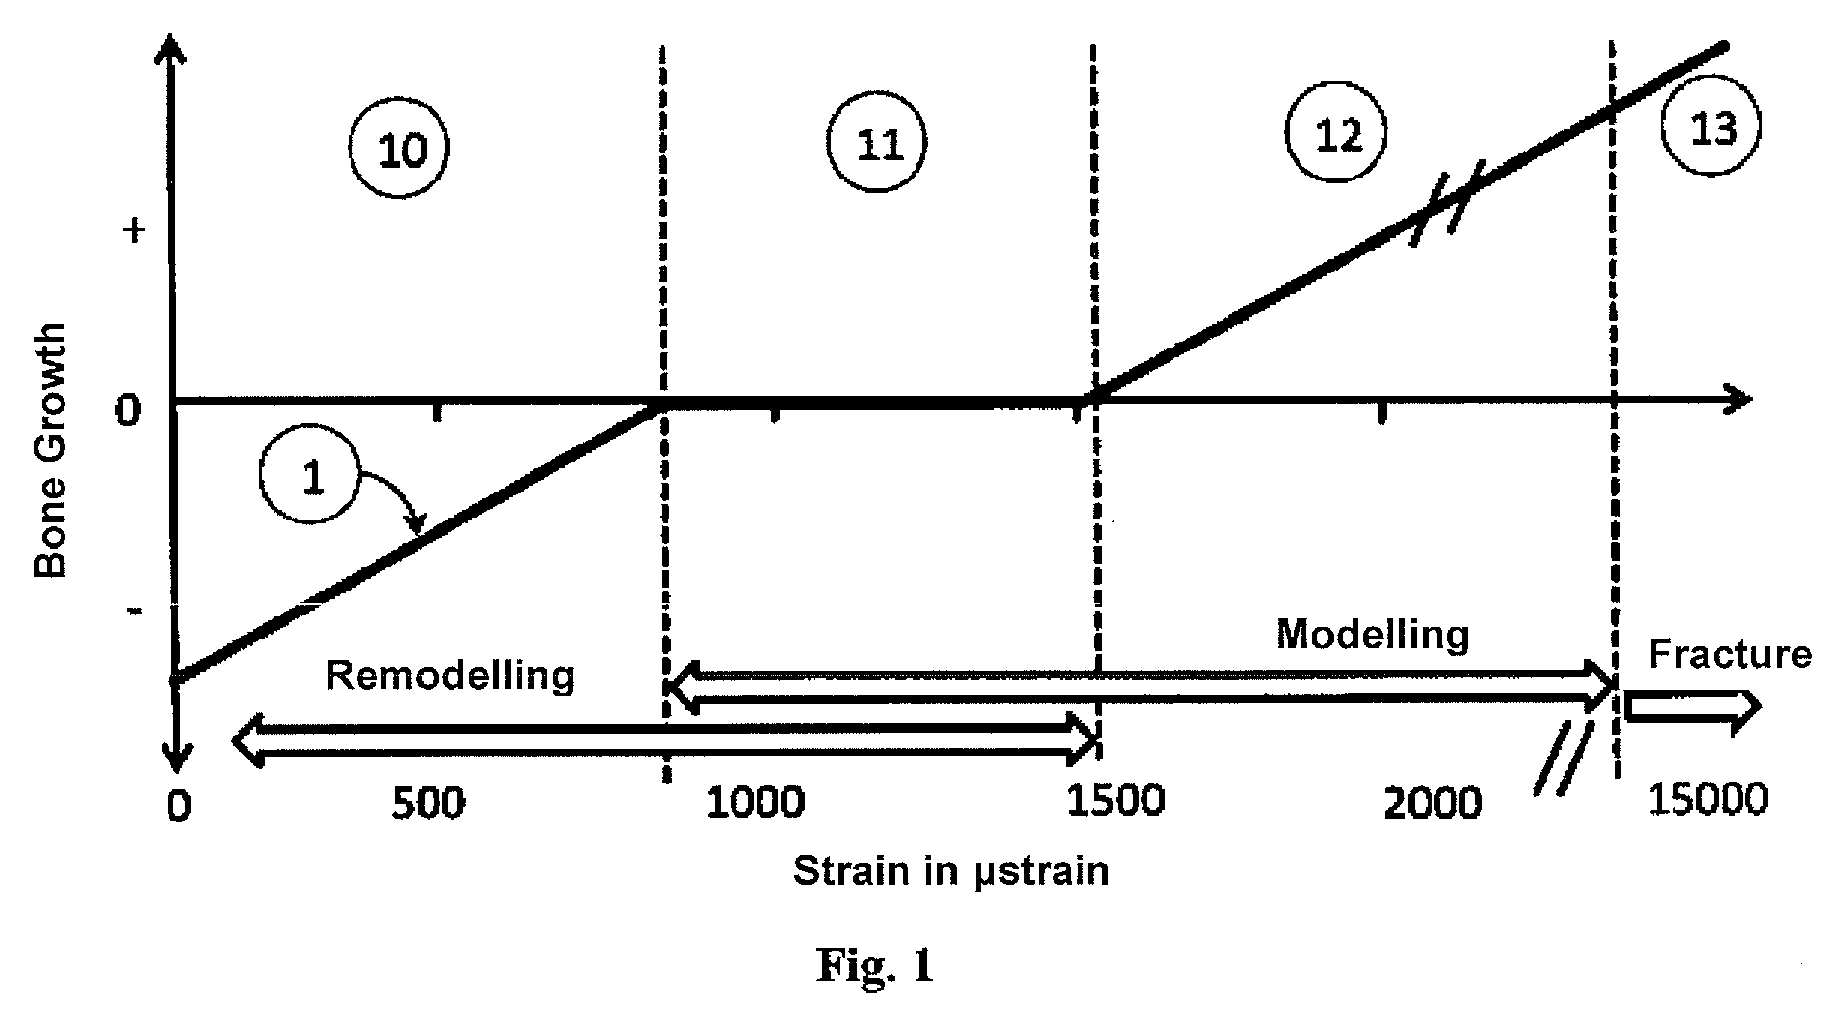 Bone-anchoring or bone-connecting device that induces a strain stimulus